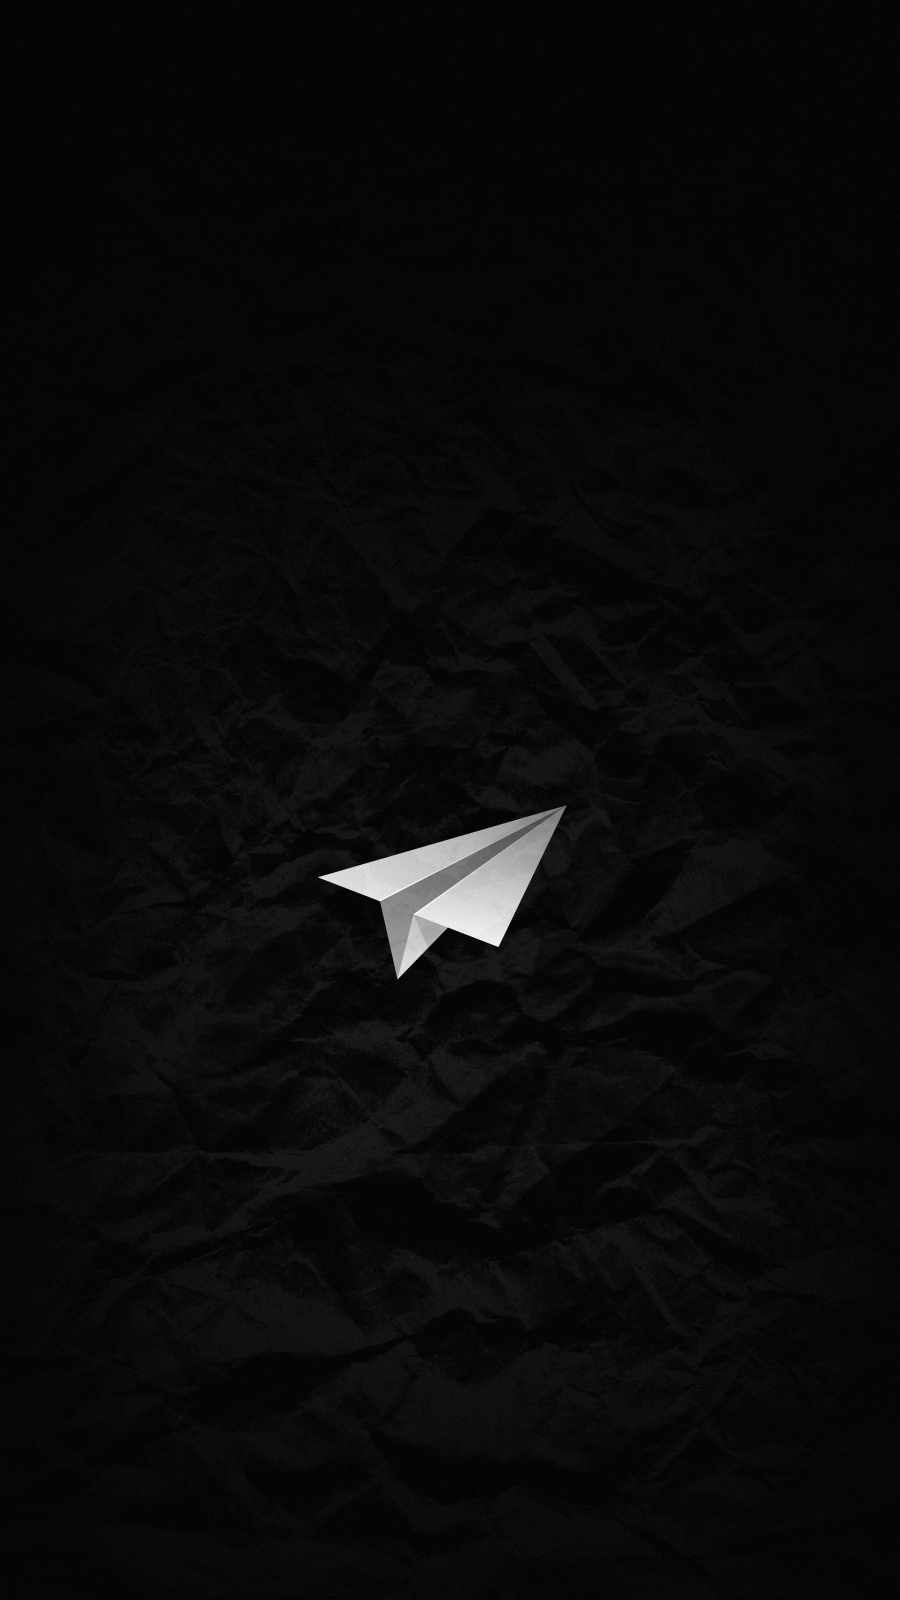 Telegram Background 1  Wallpapers AD  Chat wallpaper whatsapp Whatsapp  background Wallpaper wa